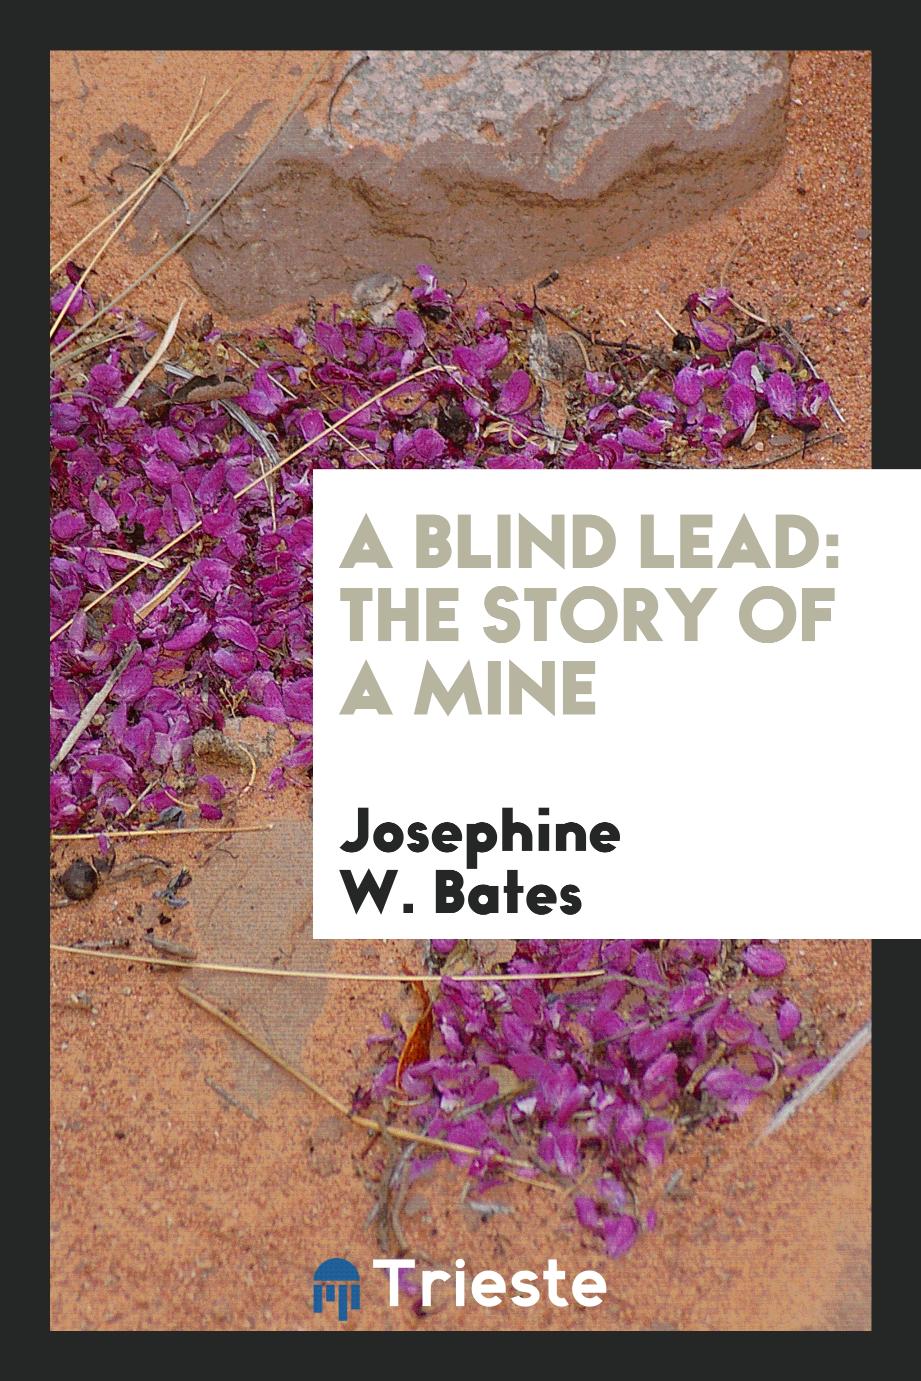 A Blind Lead: The Story of a Mine